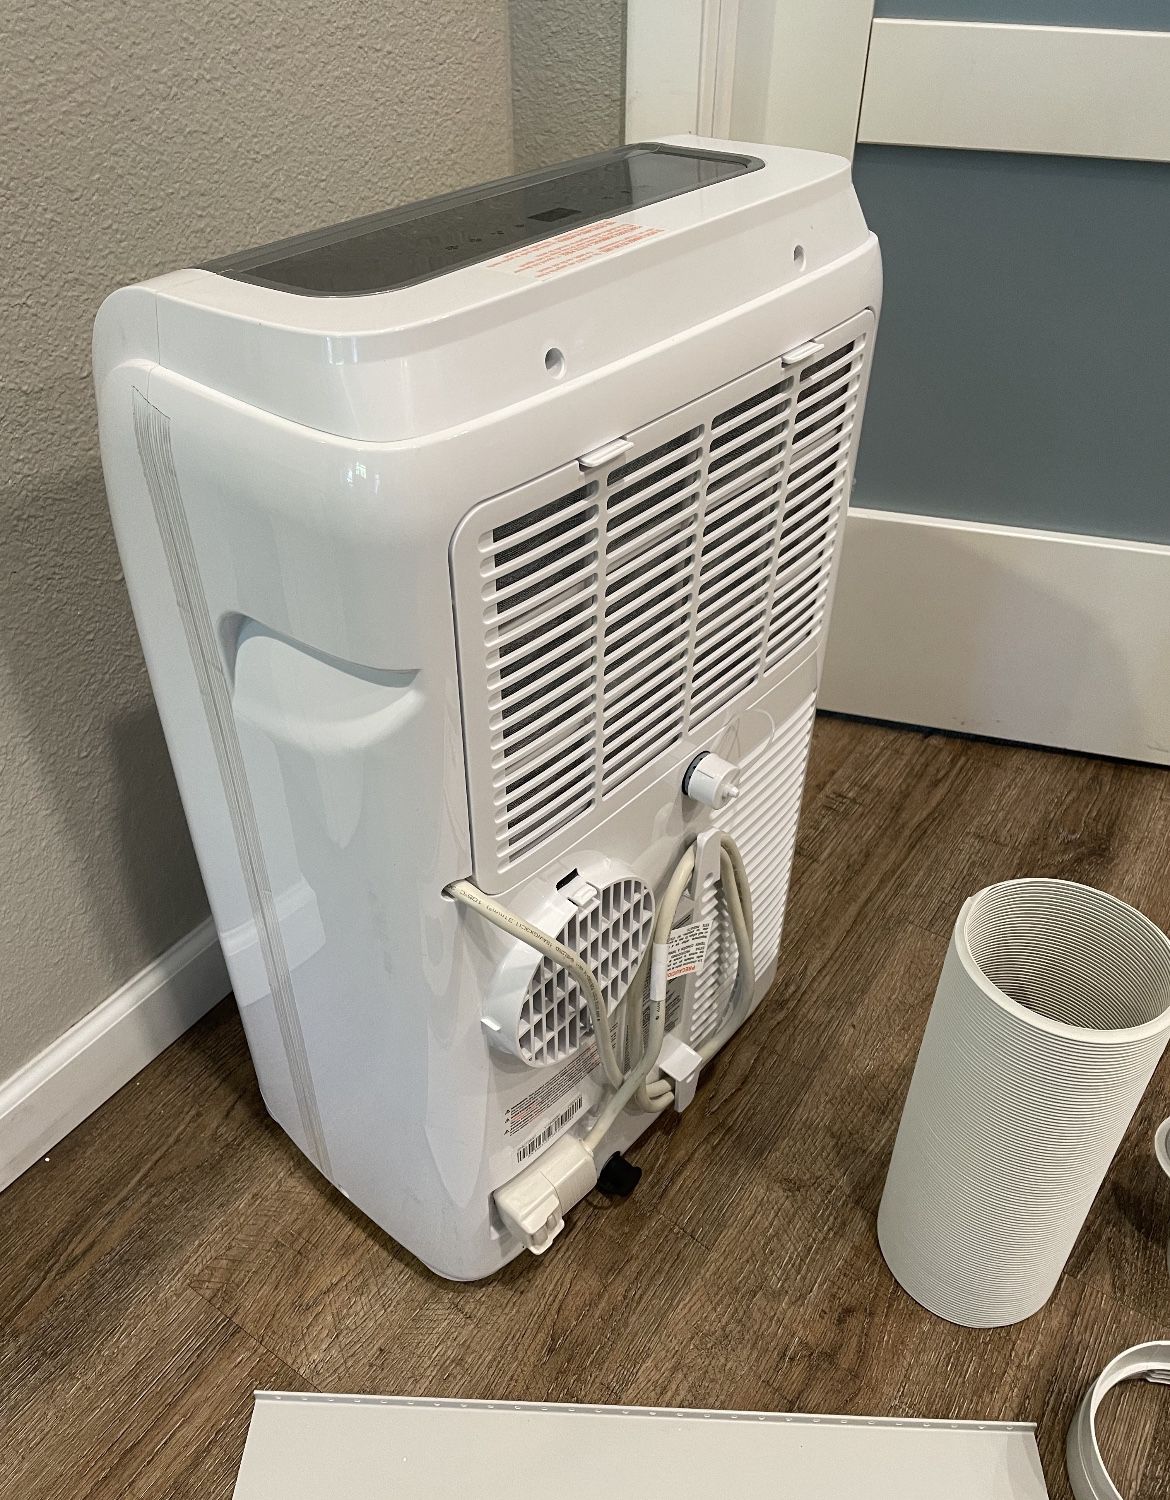 Sold at Auction: BLACK+DECKER BPACT08WT PORTABLE AIR CONDITIONER